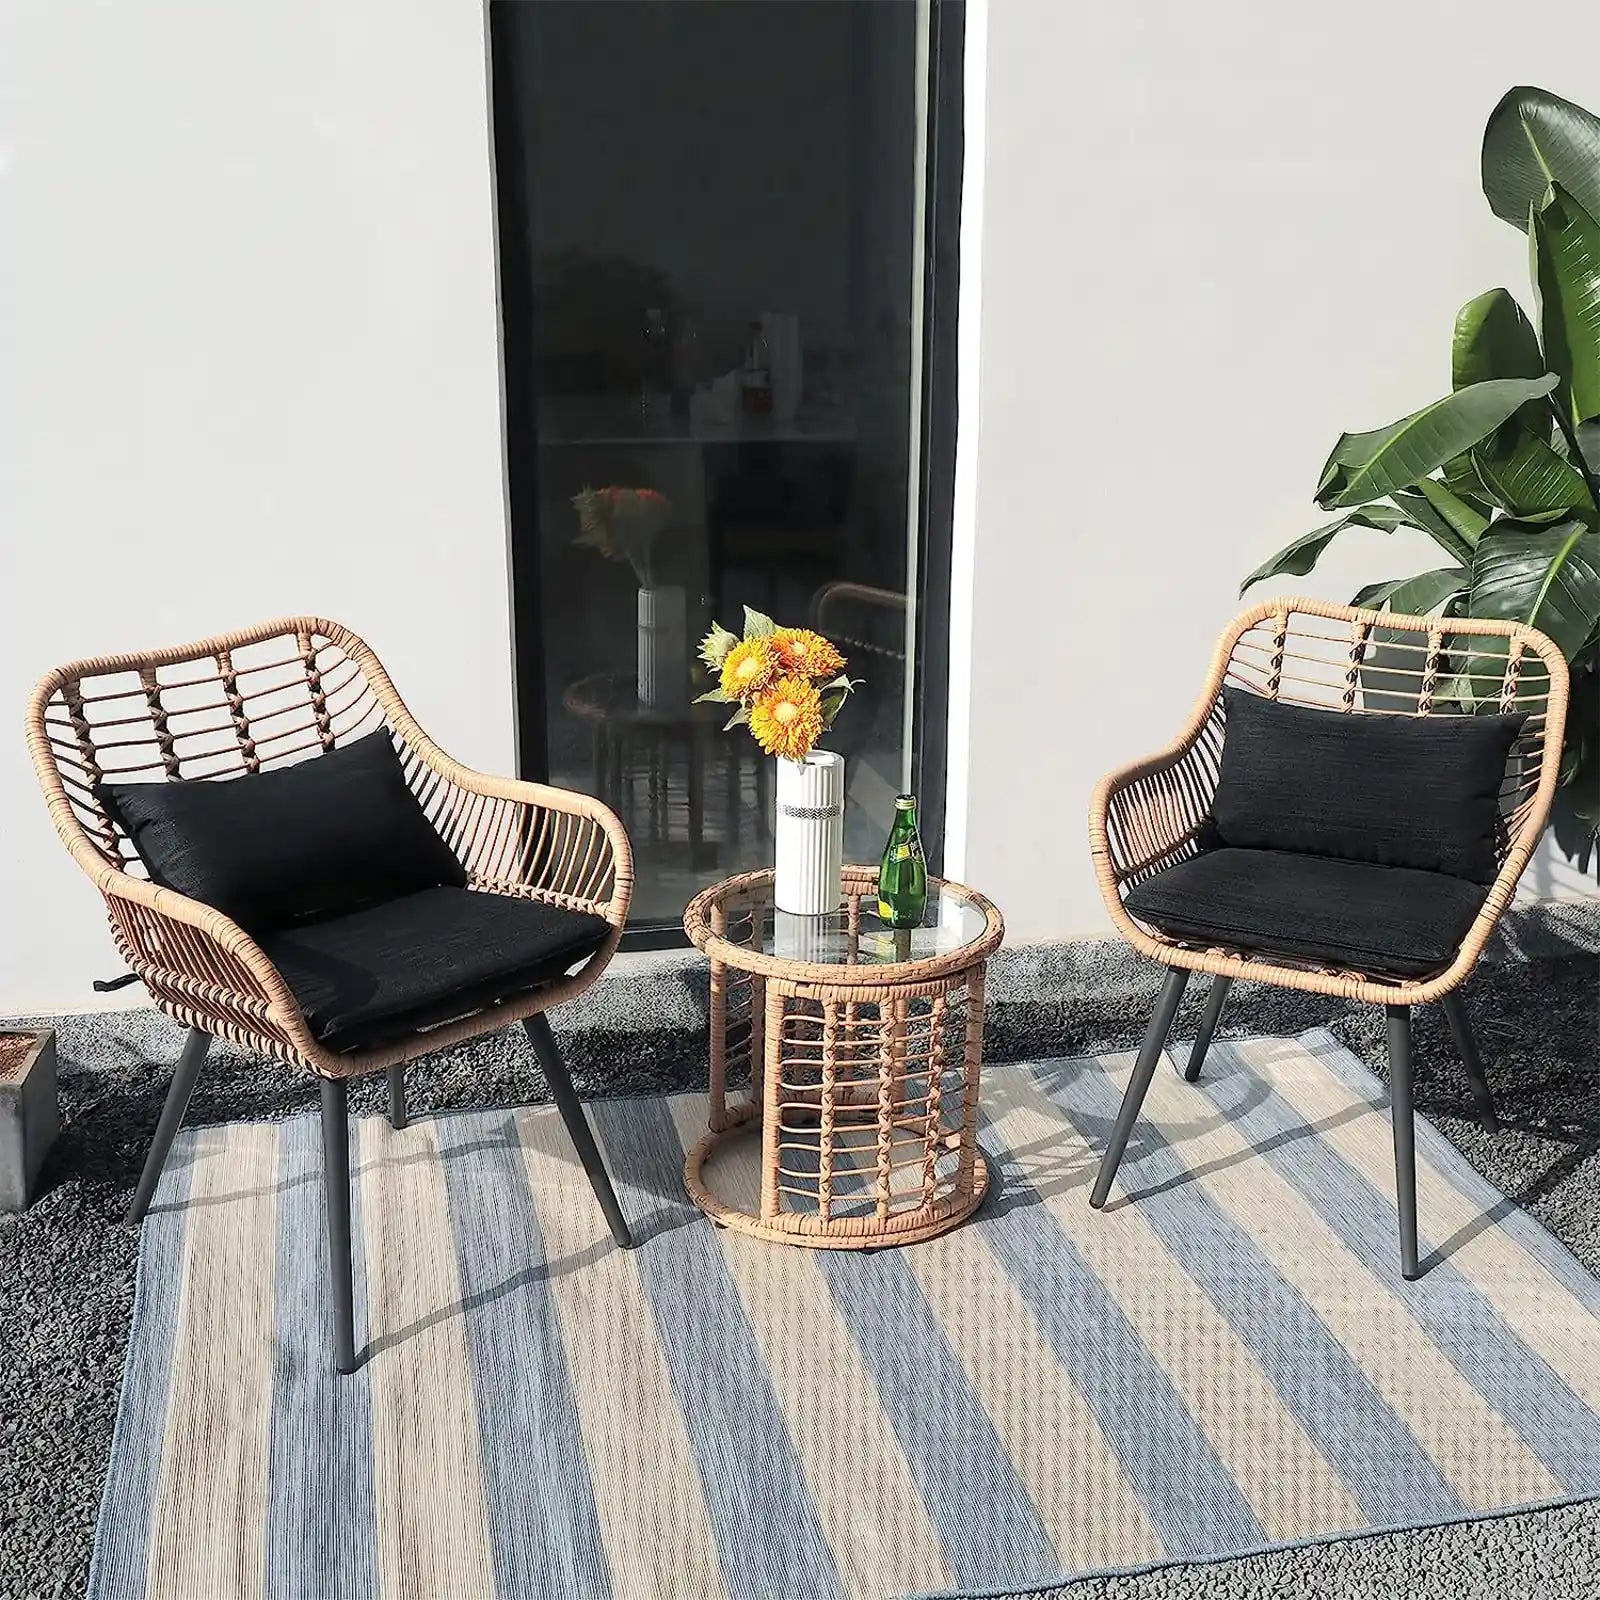 3 Piece Outdoor Wicker Furniture Bistro Set, Patio Rattan Conversation Set with Round Glass Top Coffee Side Table, Cushions for Porch, Backyard, Deck